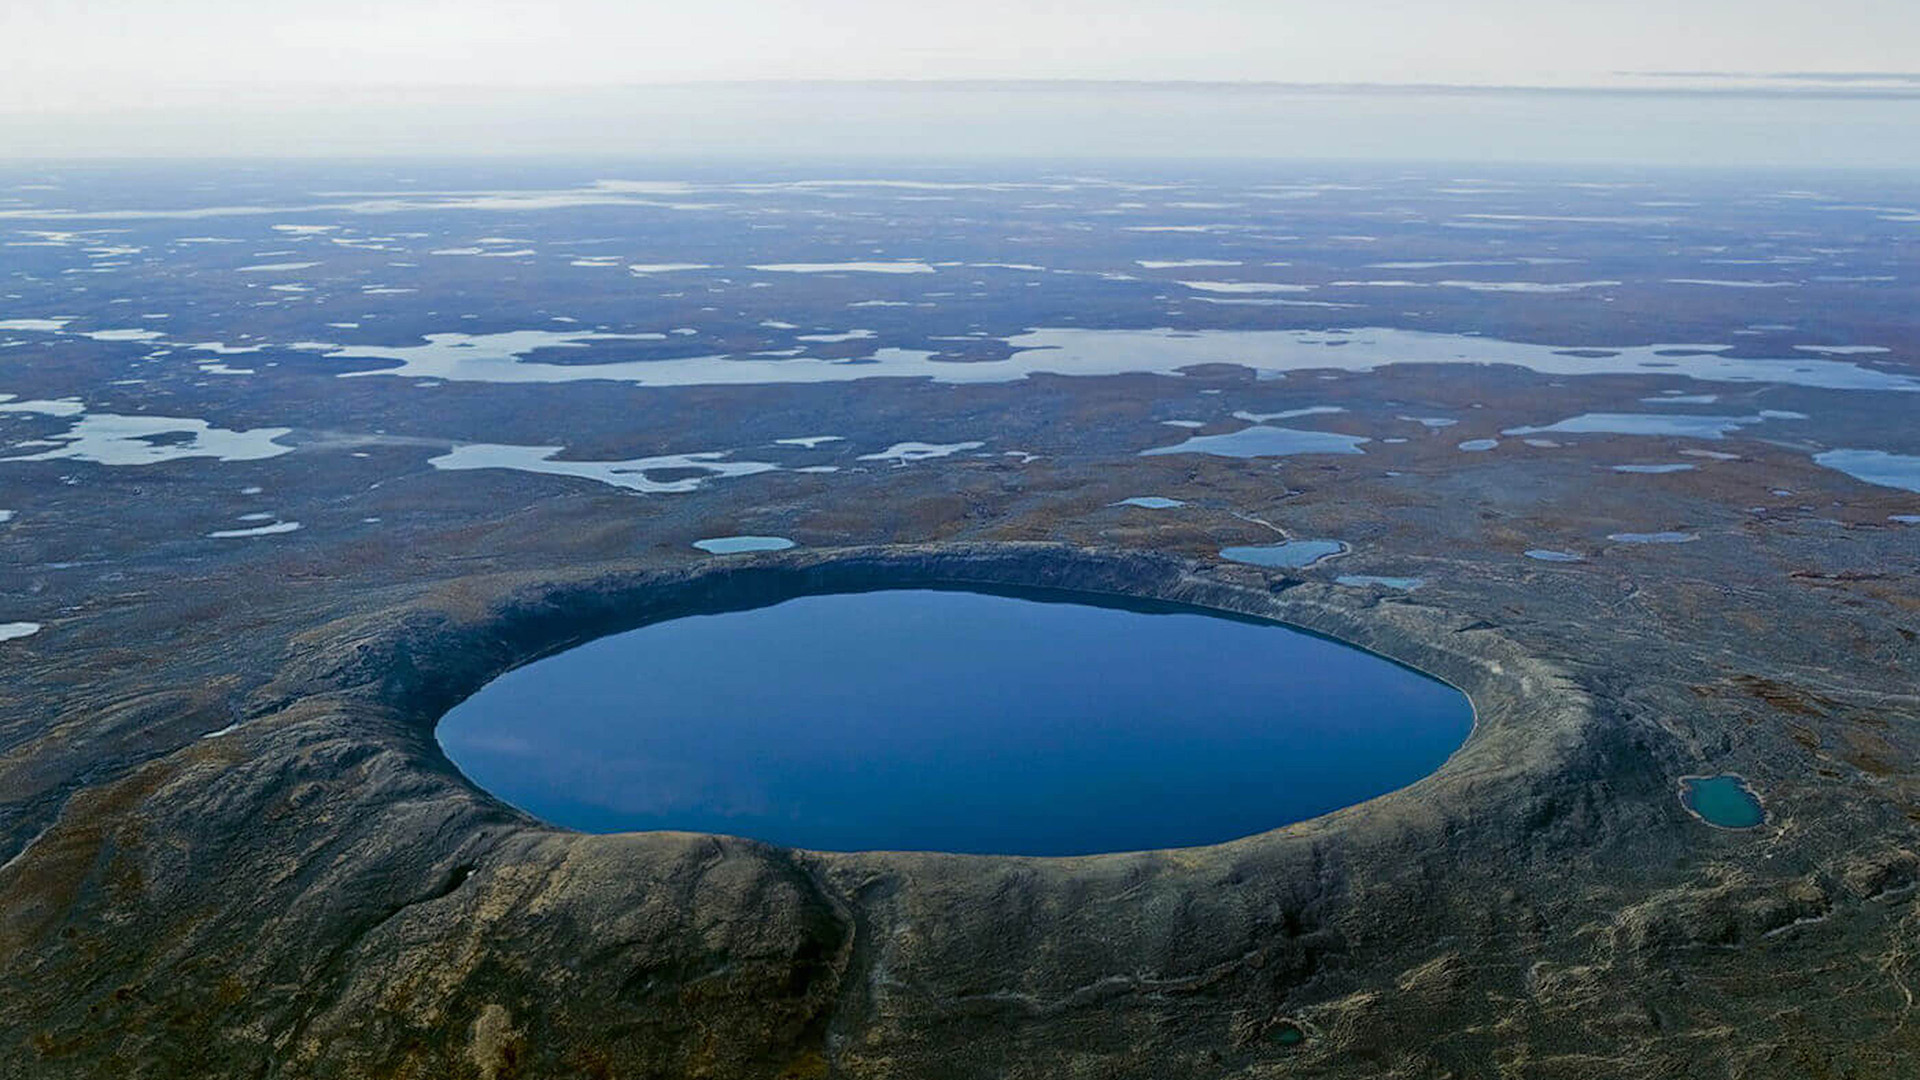 The edges of the pingualuit are 160 meters high and a lake has formed inside it due to snow and rain (Photo: Quebec Tourism Office)